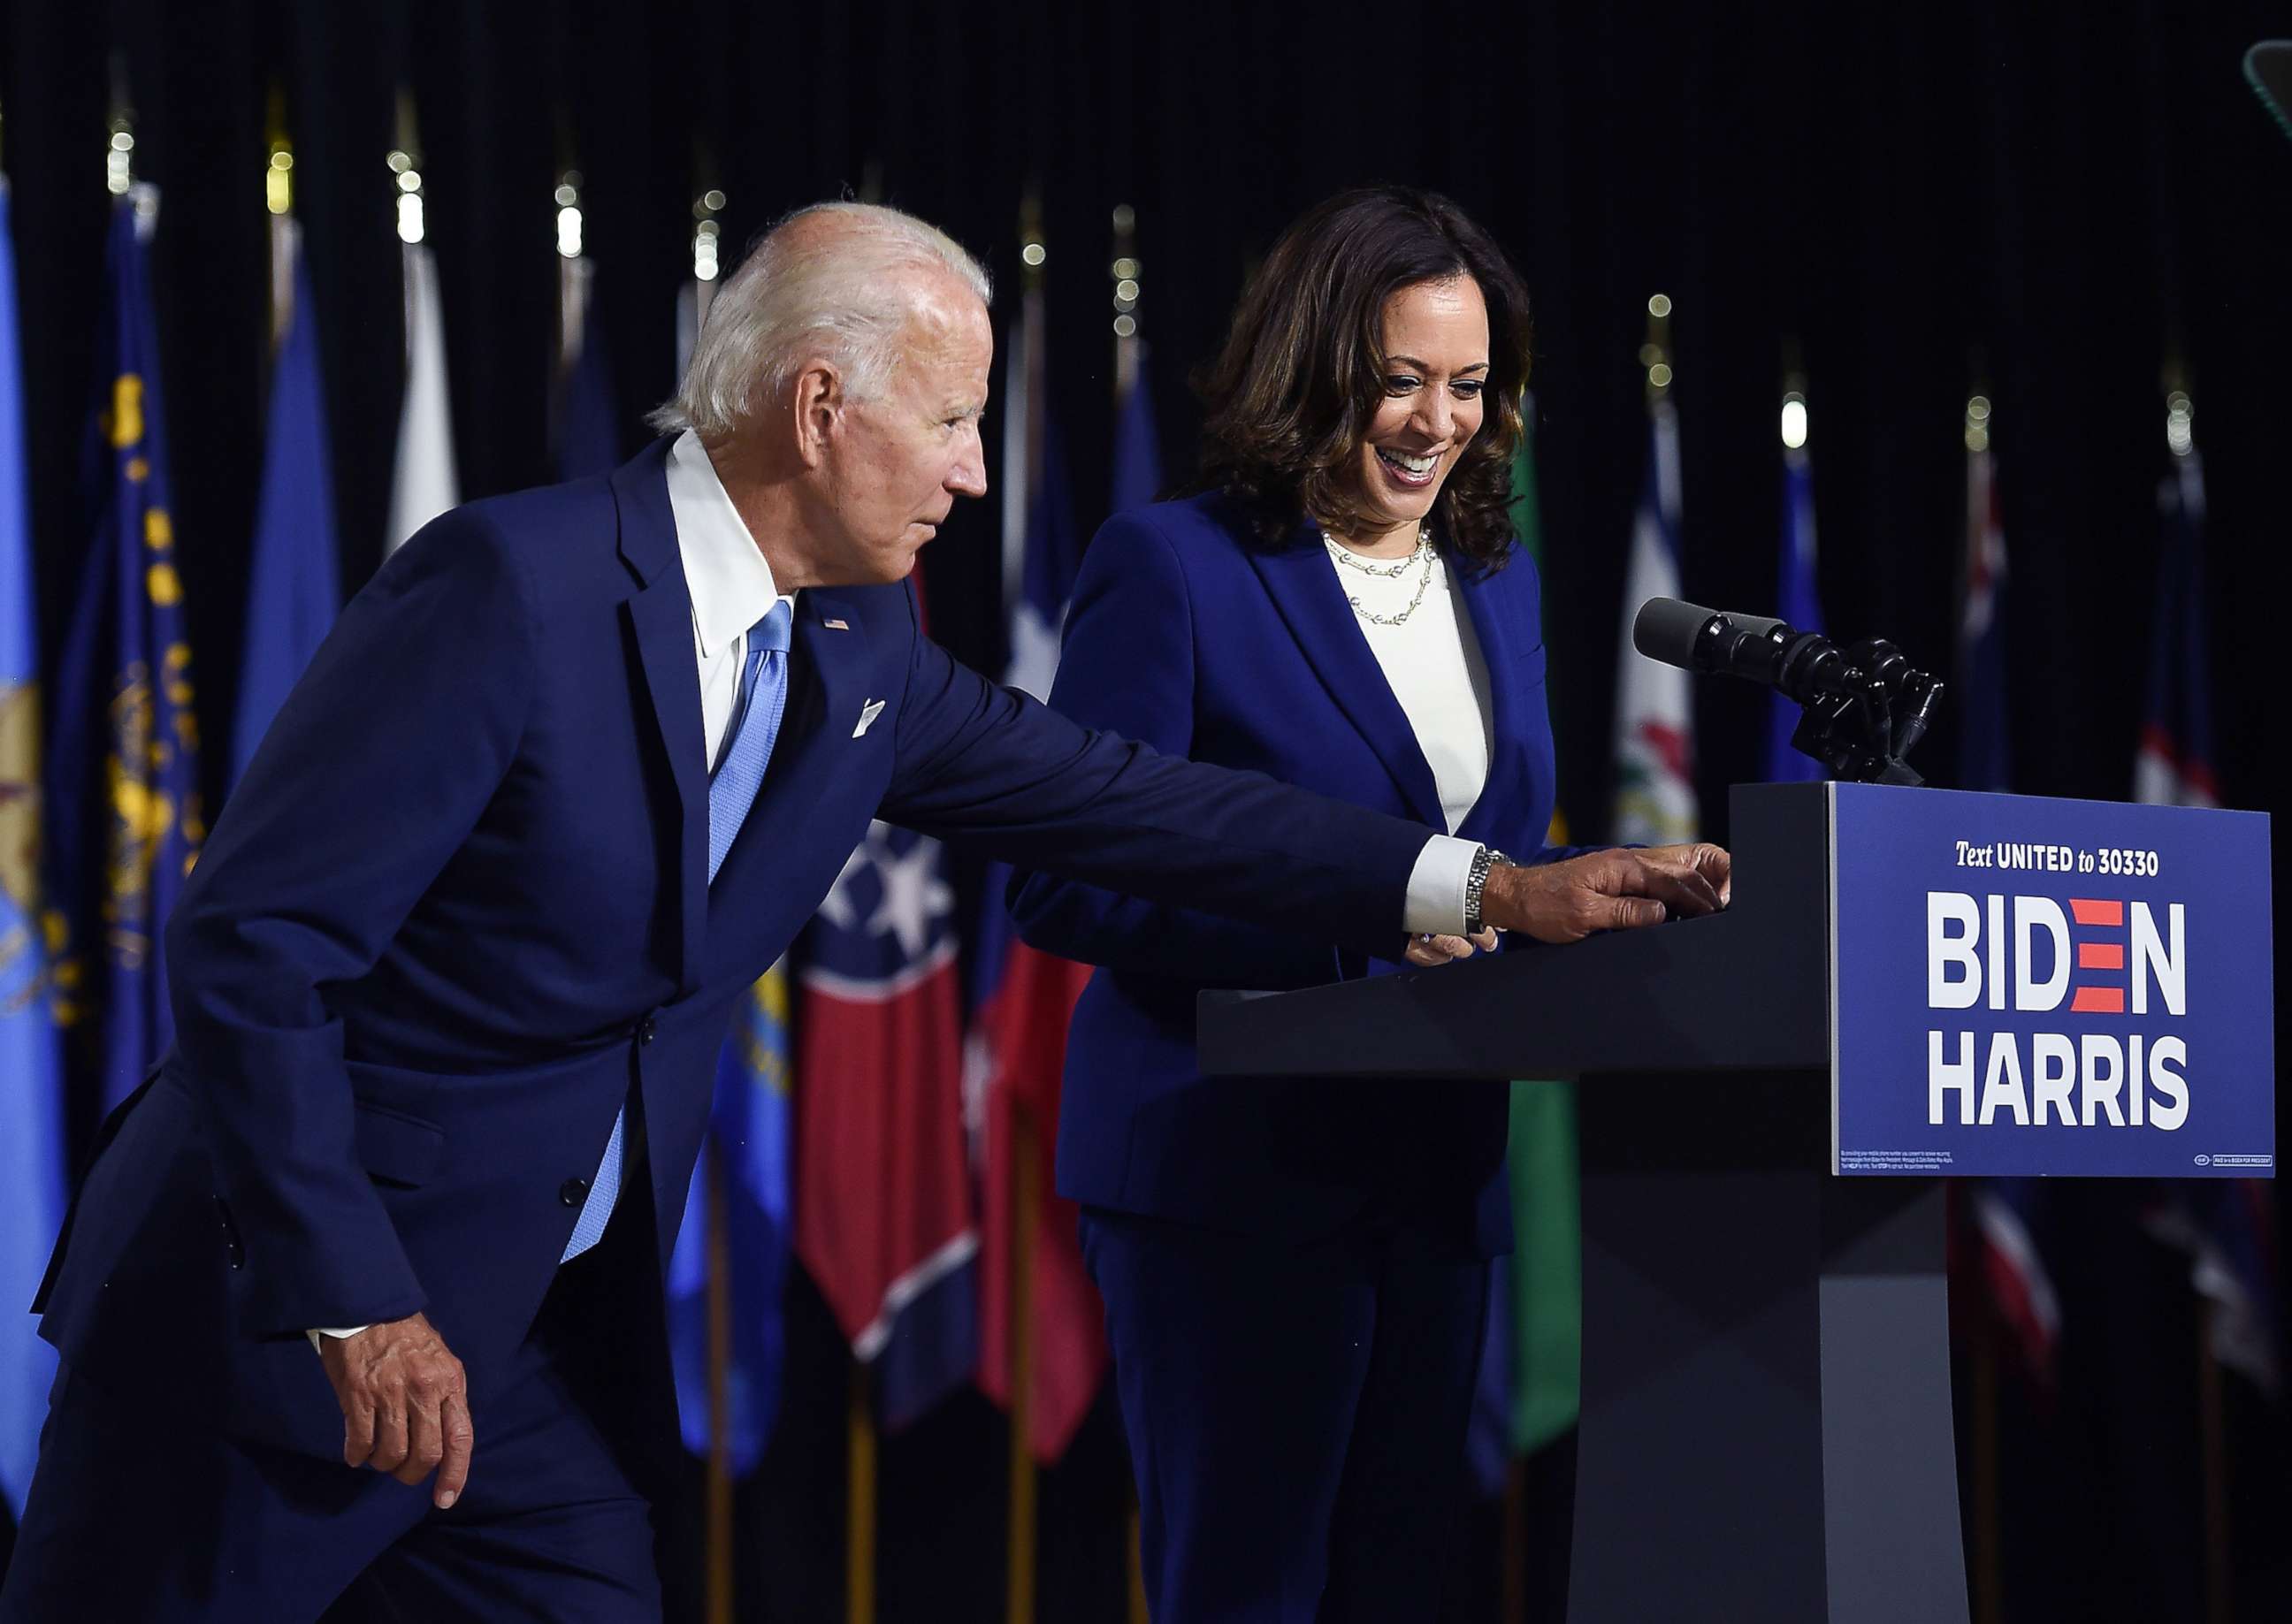 PHOTO: Democratic presidential nominee and former Vice President Joe Biden introduces his vice presidential running mate, Senator Kamala Harris, during their first press conference together in Wilmington, Del., Aug. 12, 2020.